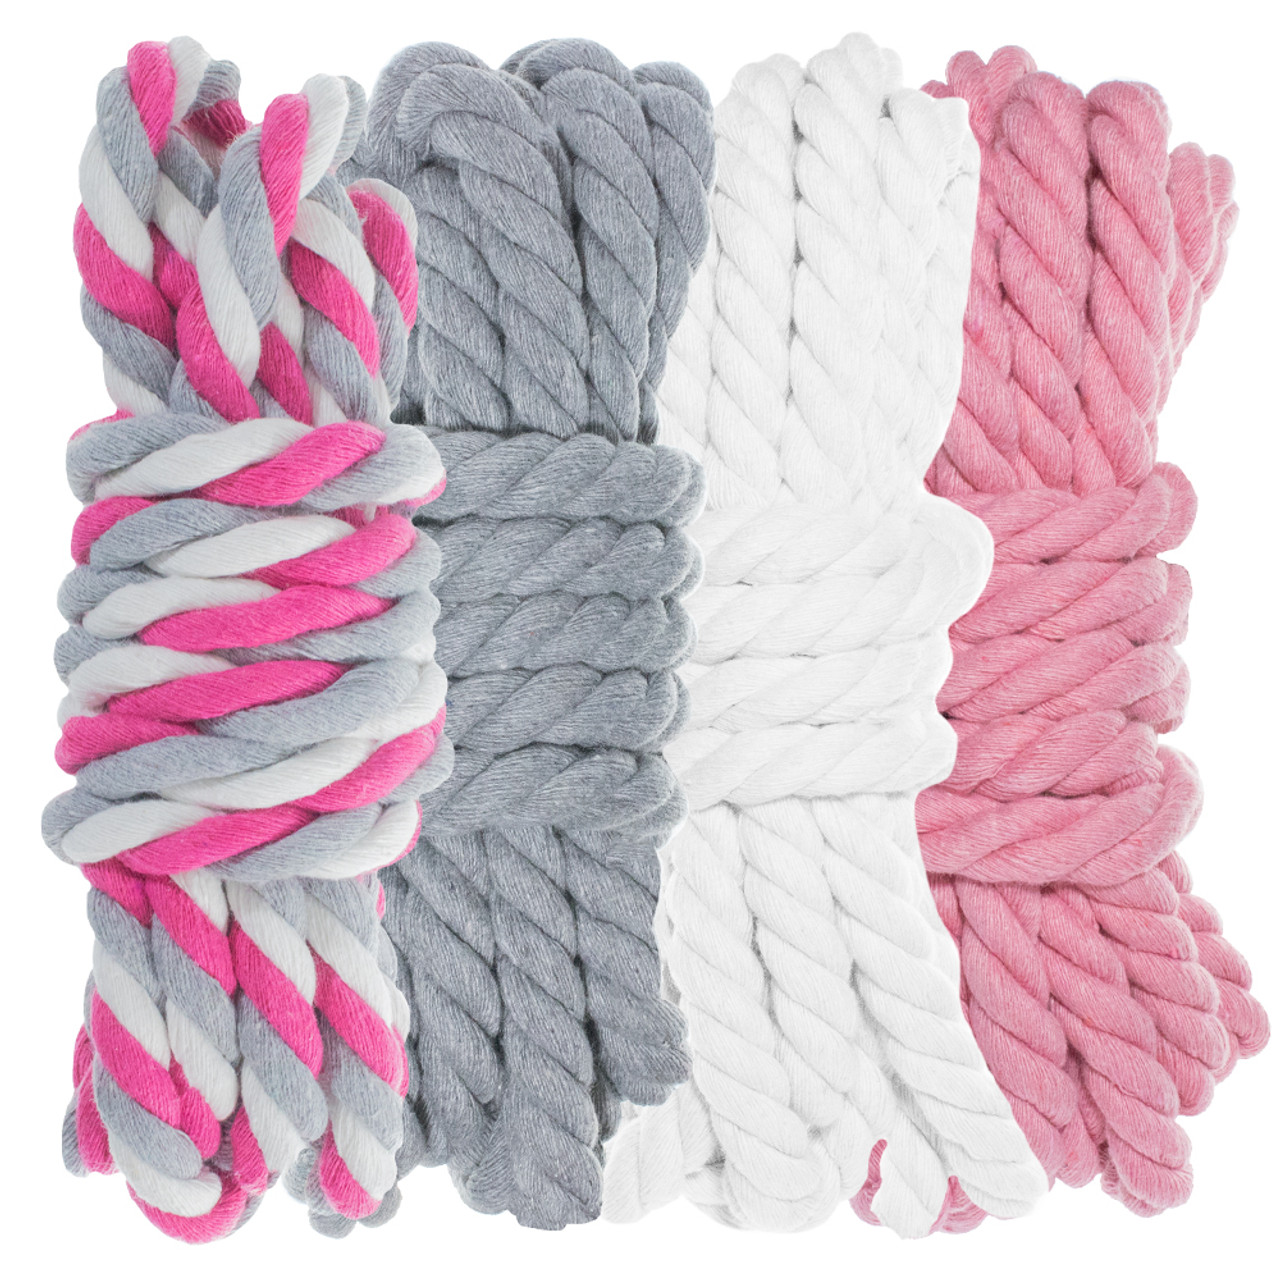 1/4 Twisted Cotton Rope Kit - WGP - 40